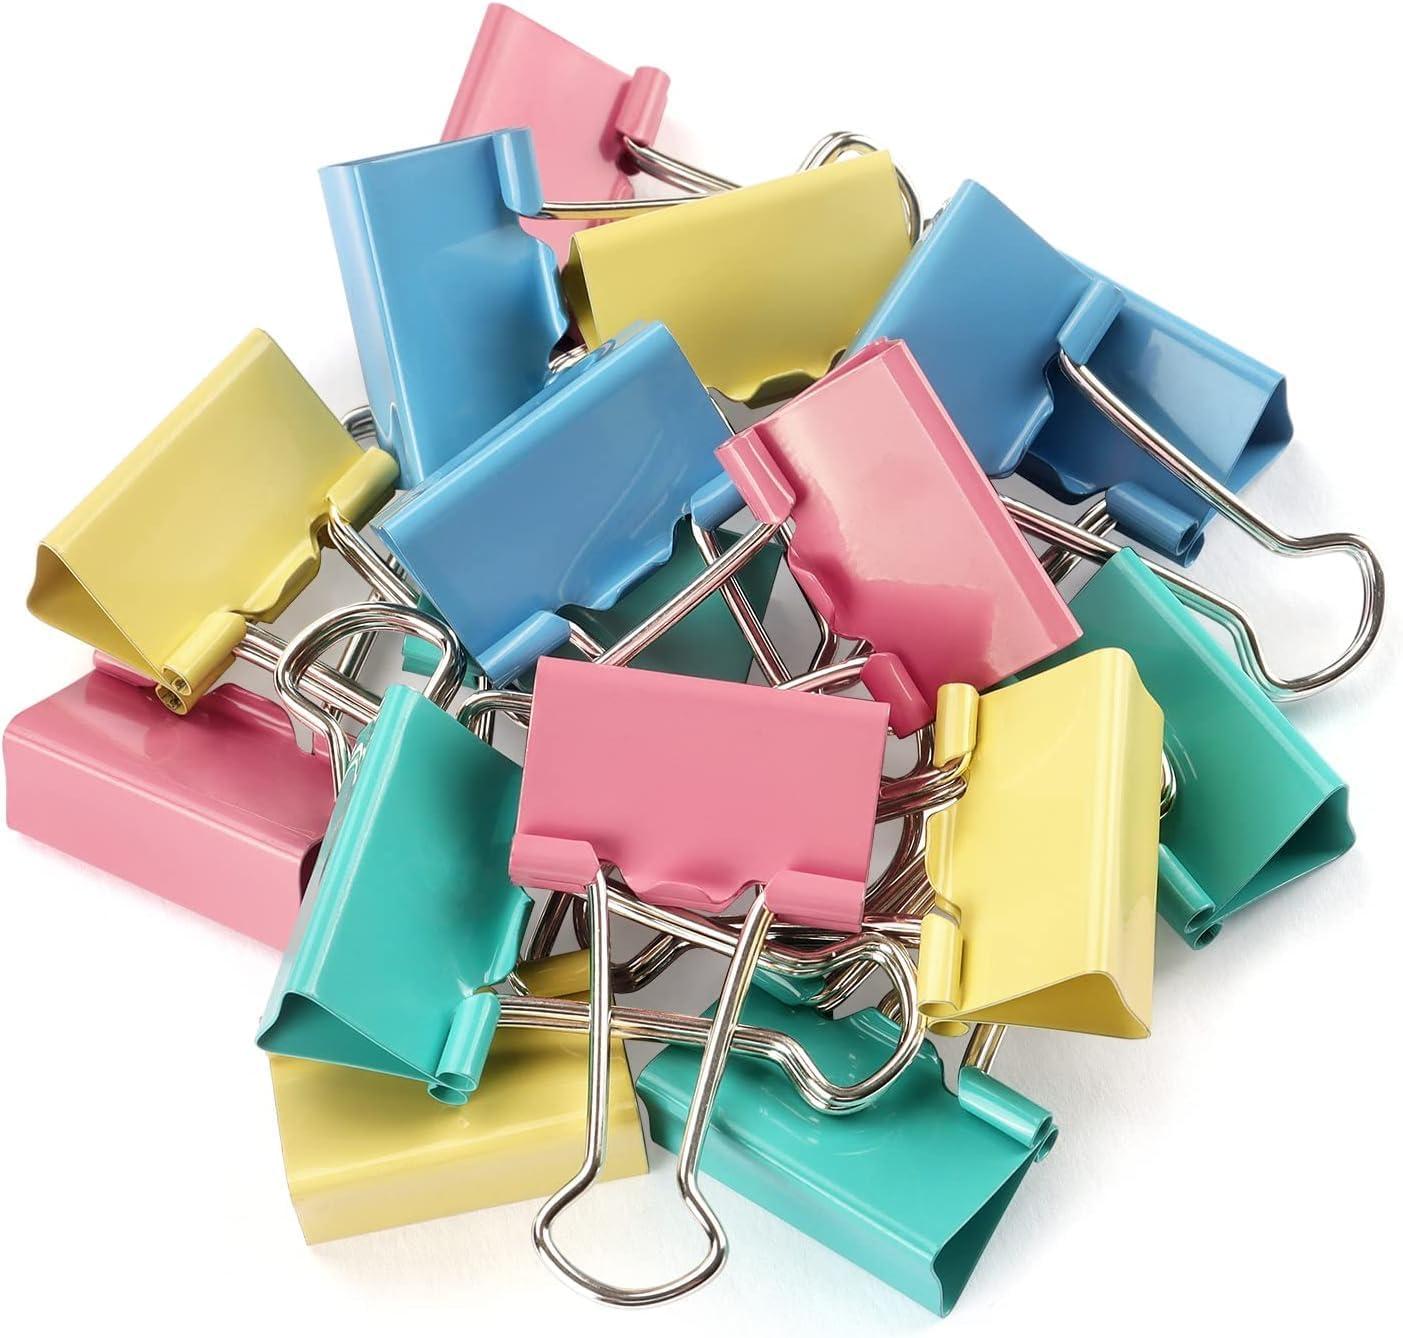 extra large binder clips 2inch binder clips 25pack metal paper clamps paper binder clips multicolored binder